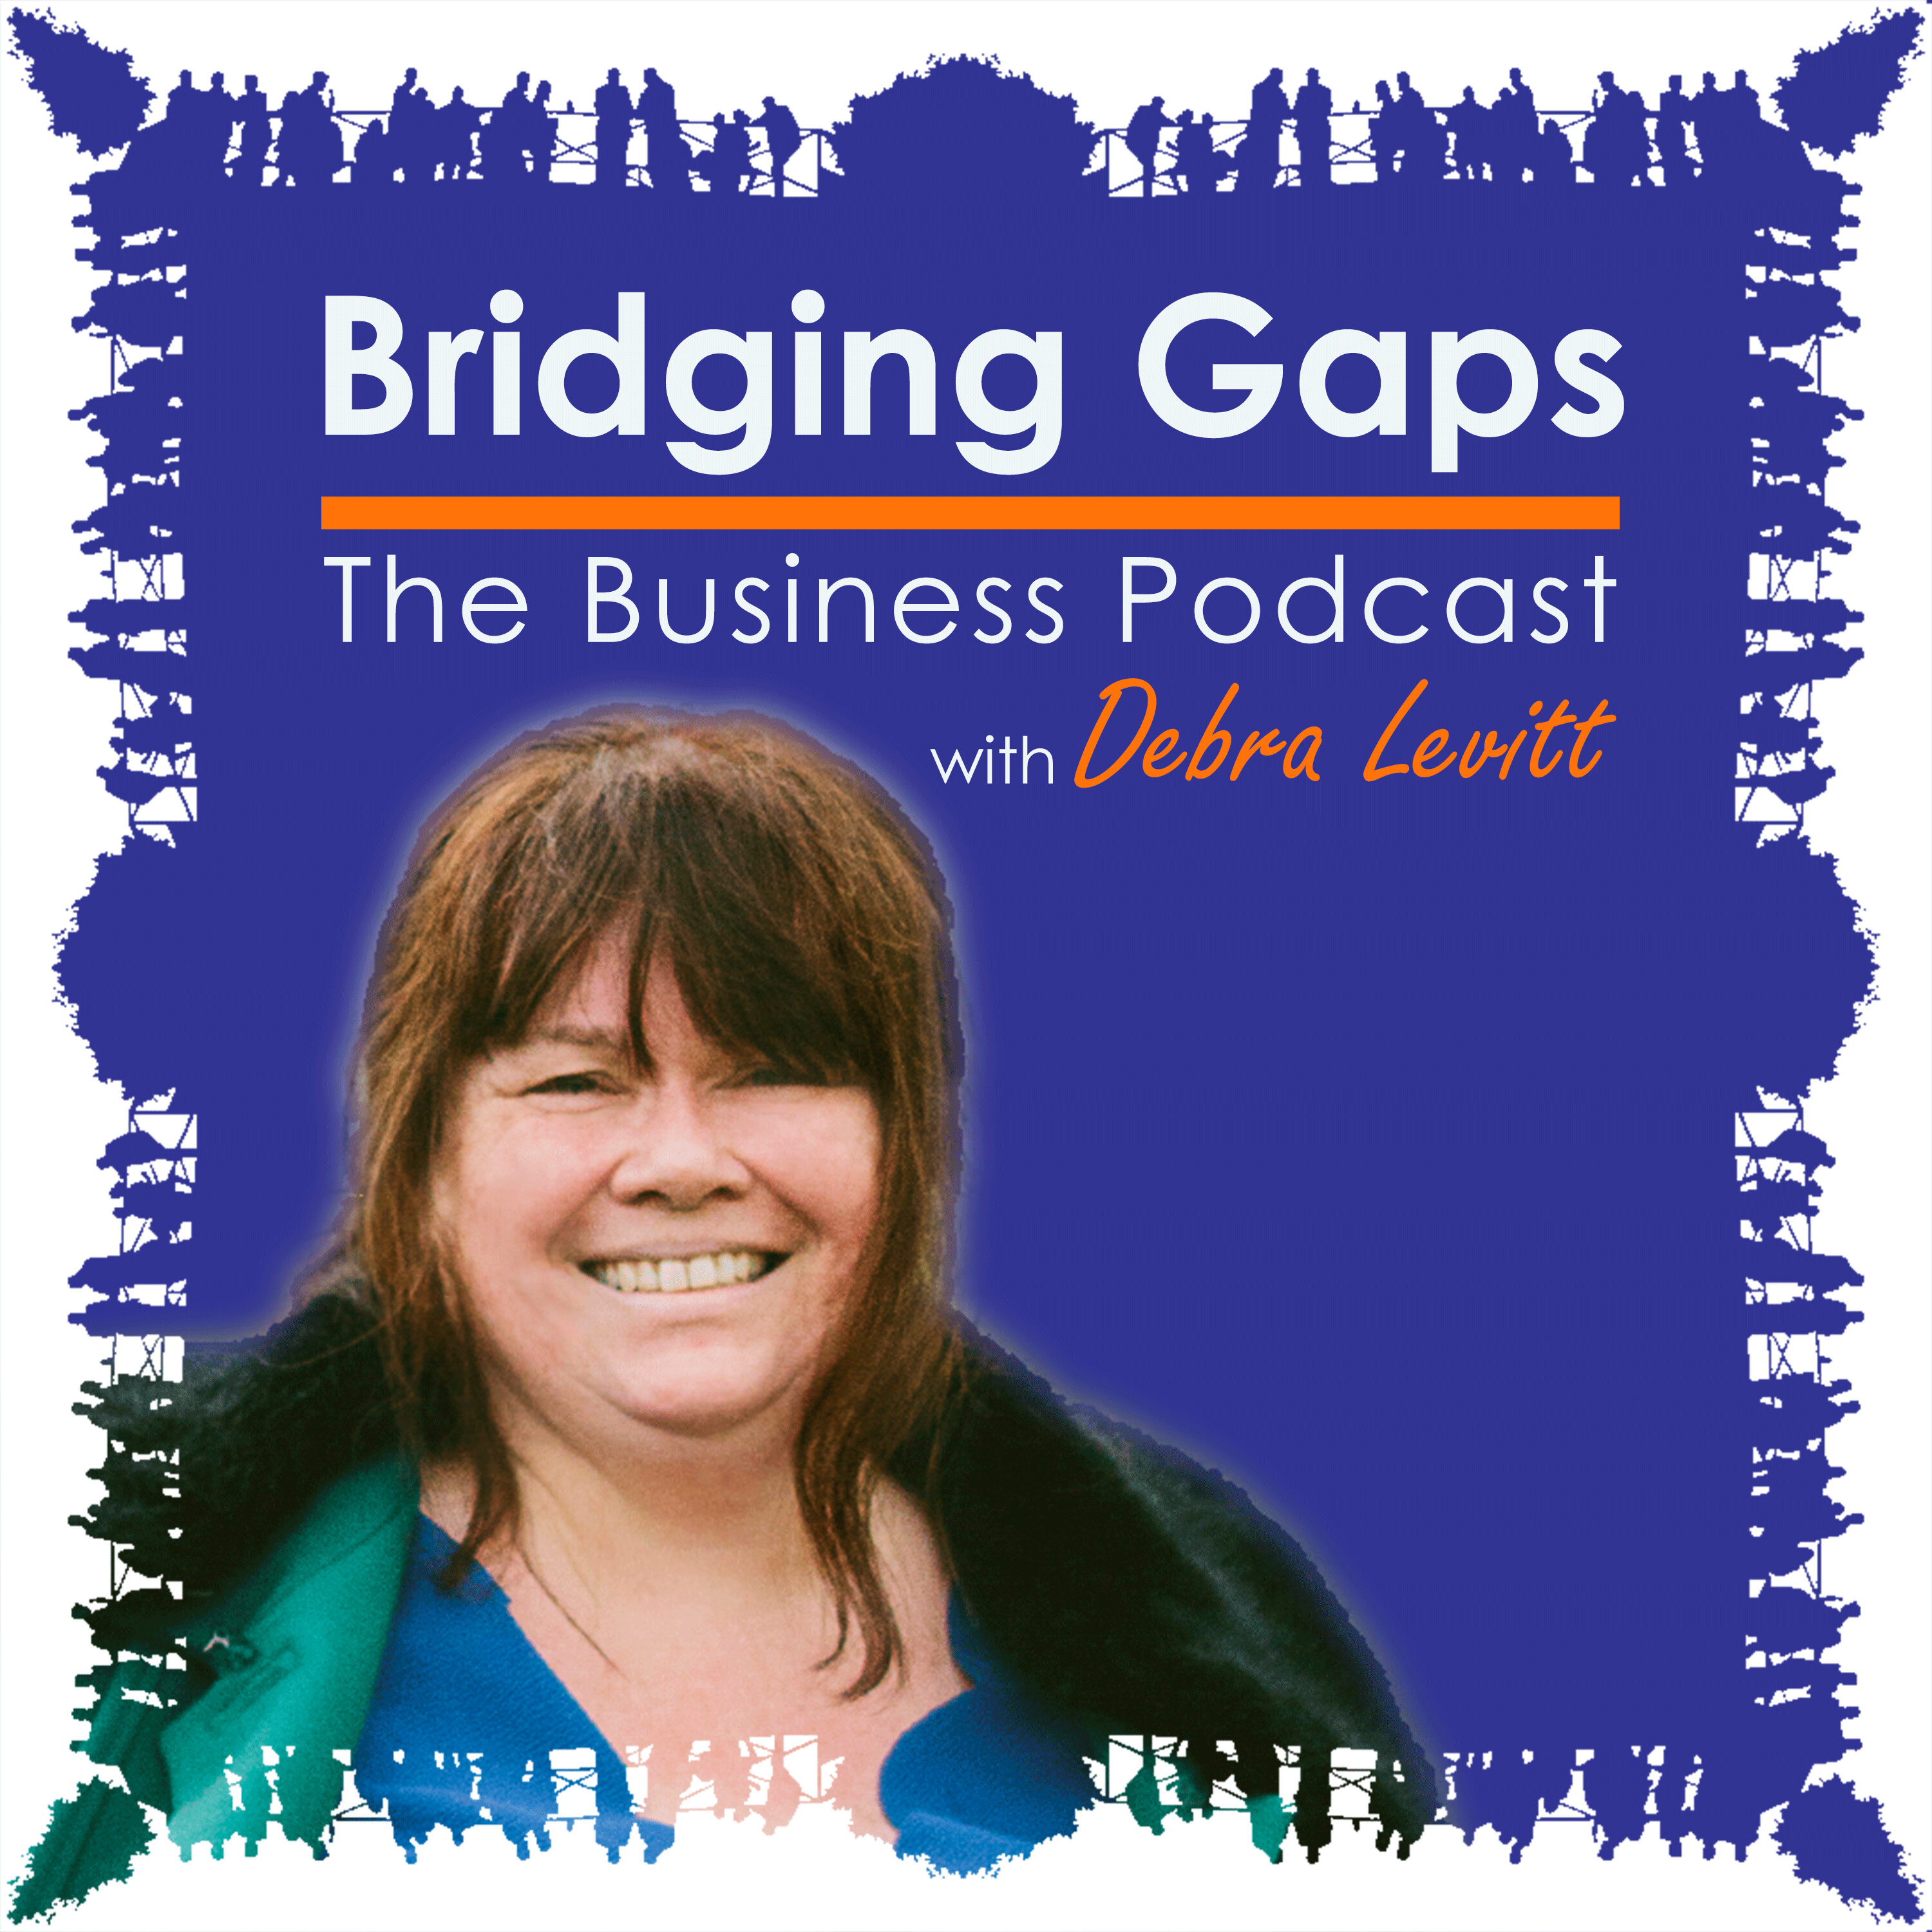 Bridging Gaps - The Business Podcast